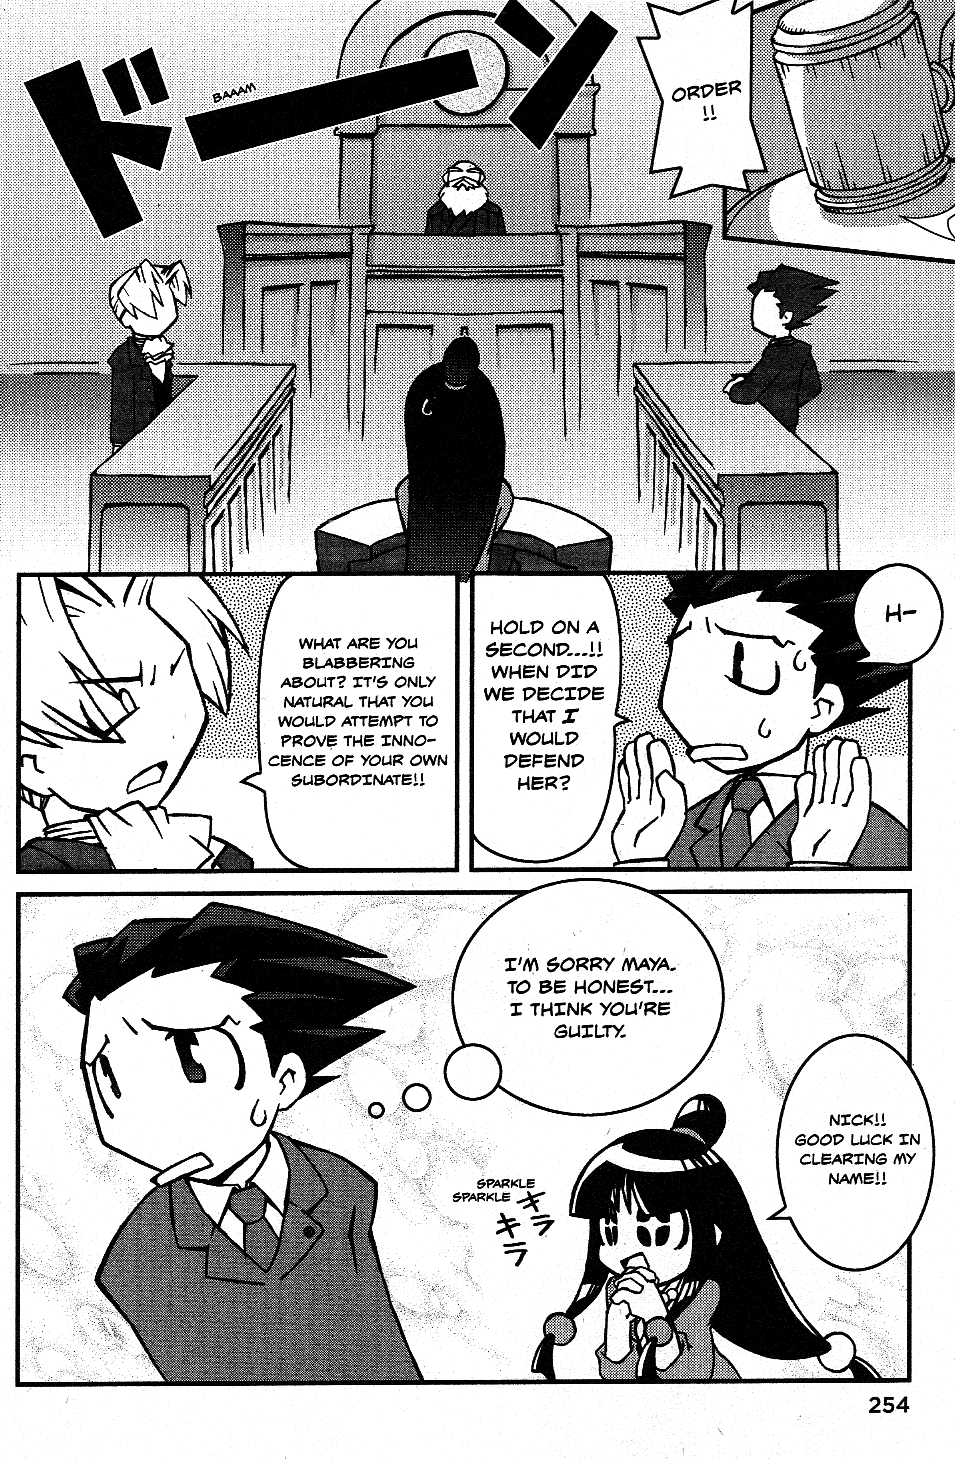 Phoenix Wright: Ace Attorney - Official Casebook Vol.1 Chapter 18: The Mystery Of The Missing Manjû - By Tsukapon - Picture 2